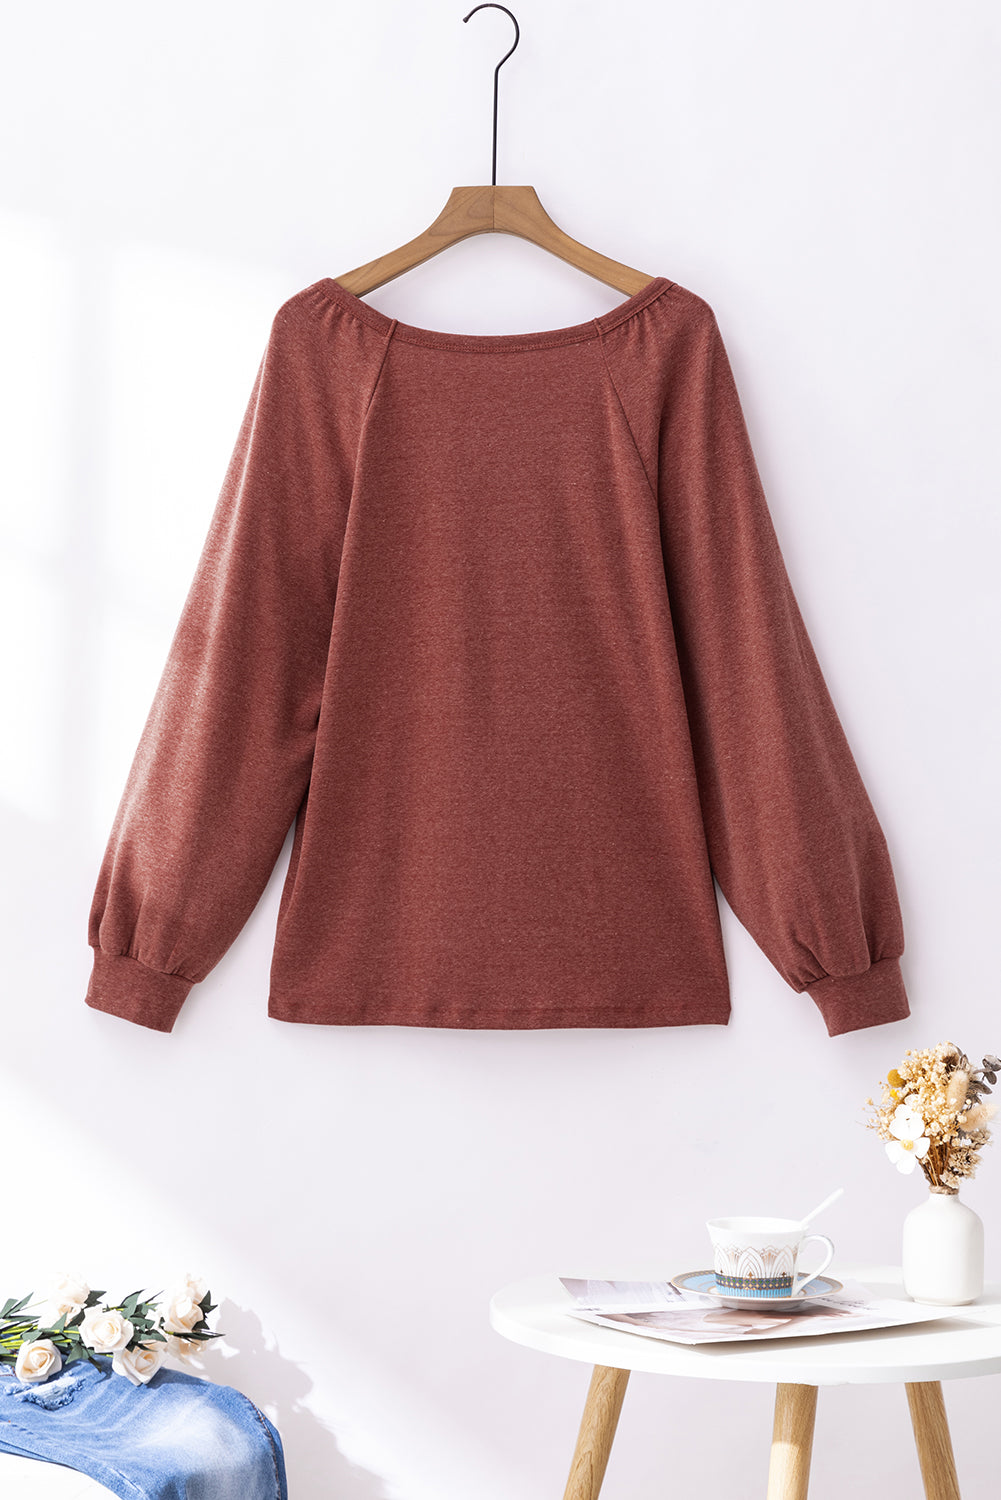 Gold Flame Square Neck Plus Size Knit Top - SELFTRITSS